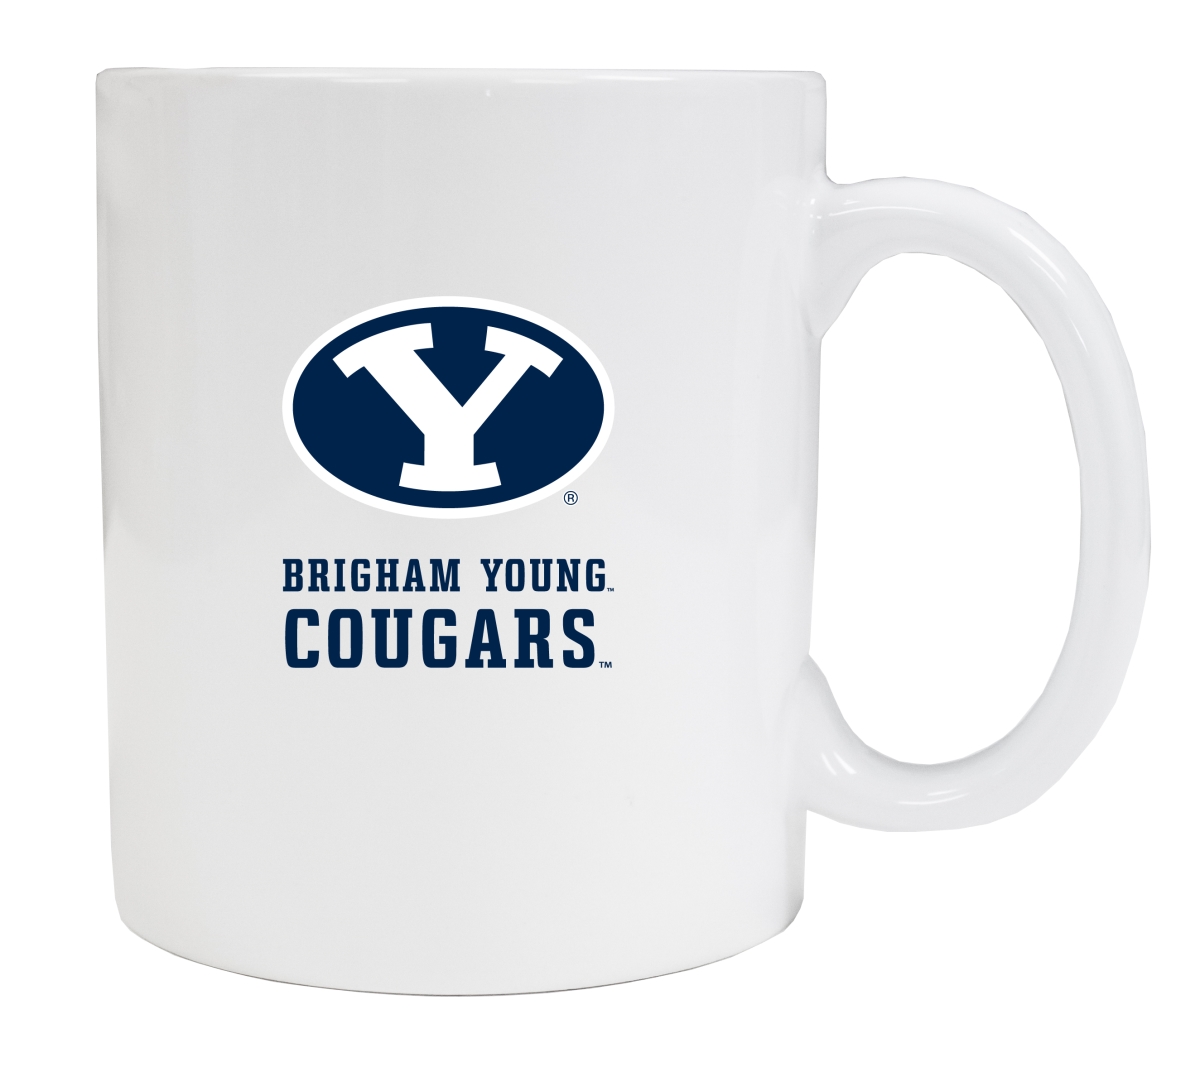 Picture of R & R Imports MUG2-C-BYU19 W Brigham Young Cougars White Ceramic Coffee Mug - Pack of 2